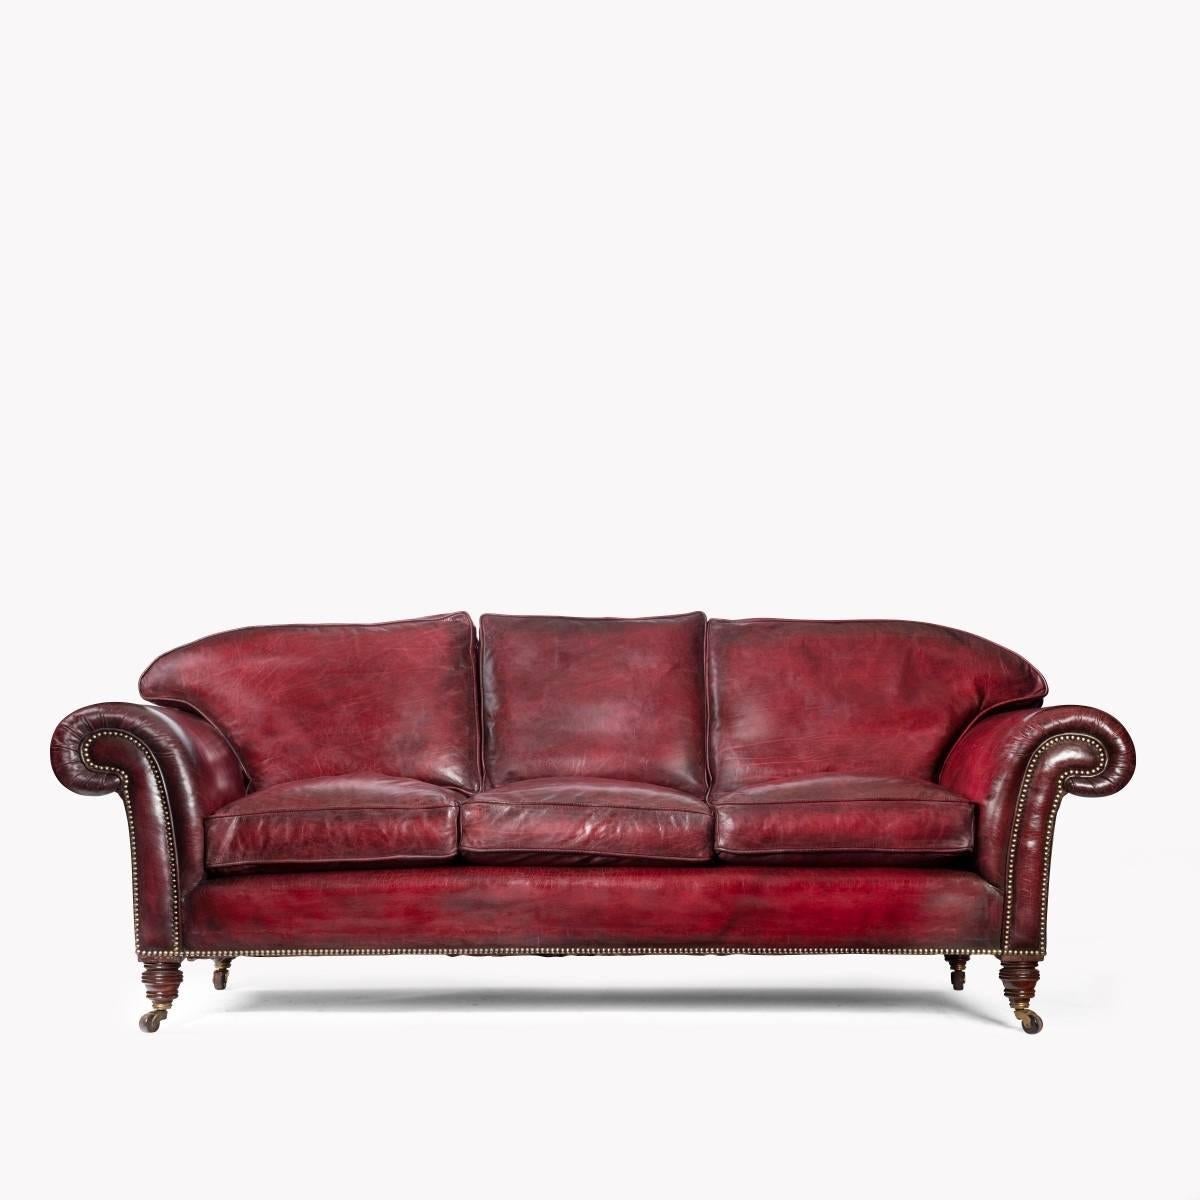 Late Victorian three-seat chesterfield sofa set upon four turned mahogany feet. Recovered in distressed leather.

Measures: H 31”
Max width 85”
Max depth 33”
Depth of seat including the cushion 29”
Width of seat 62”.